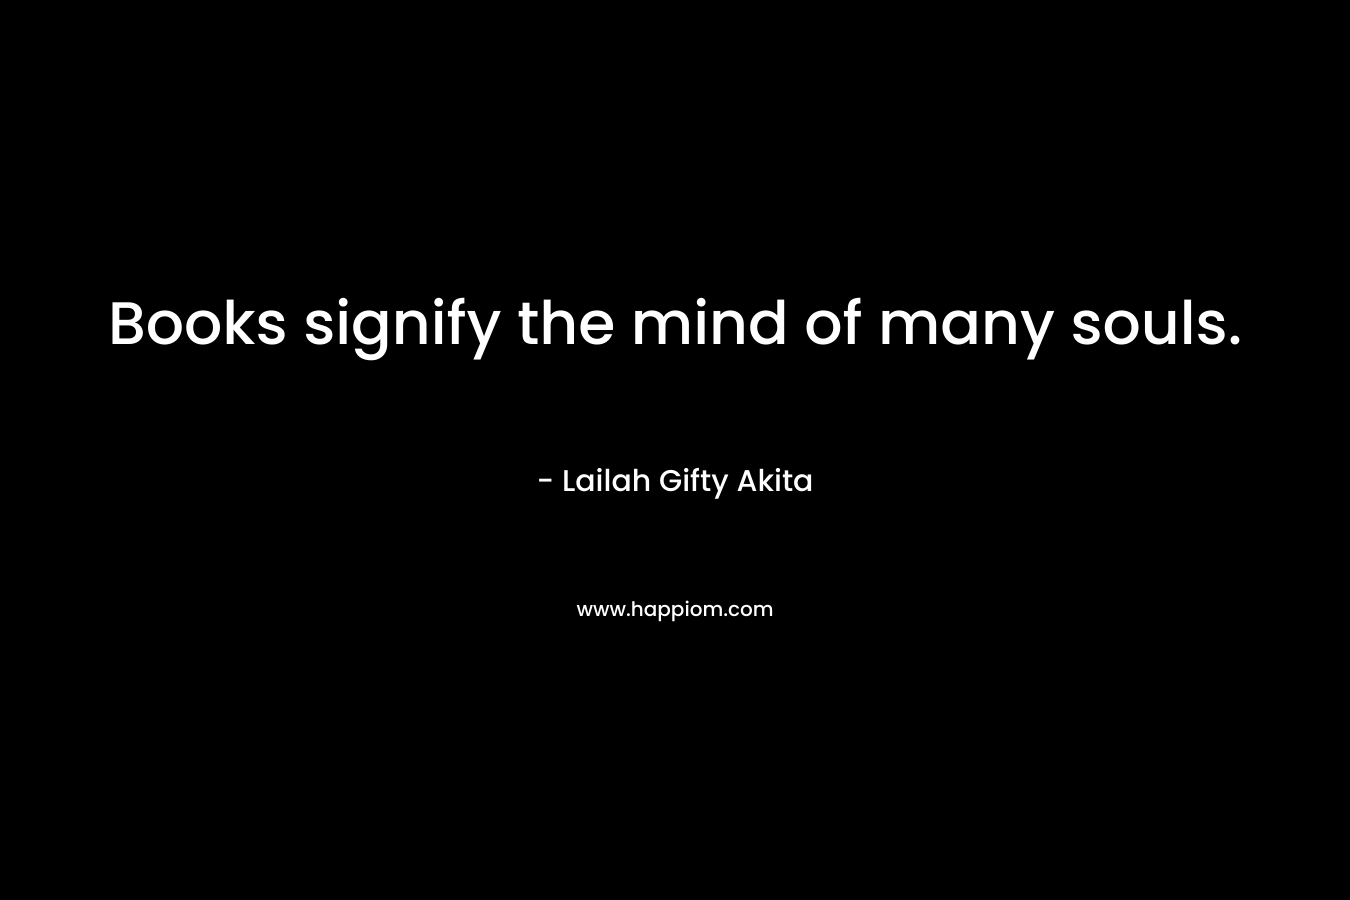 Books signify the mind of many souls. – Lailah Gifty Akita